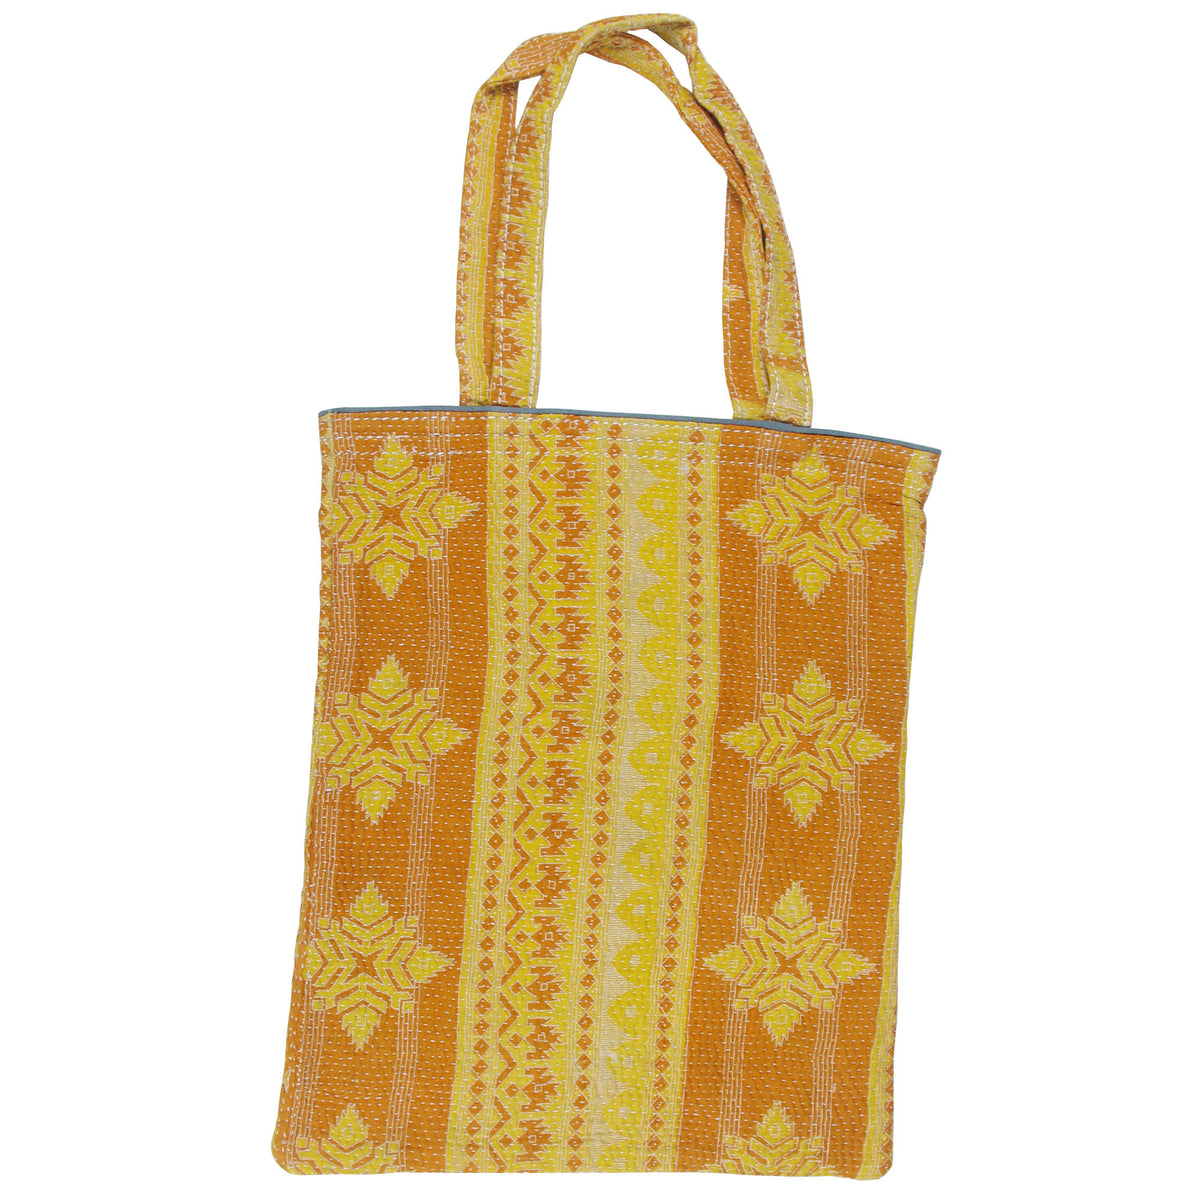 Vintage Fine Kantha Stitched Cotton Tote Bag- Brown Yellow